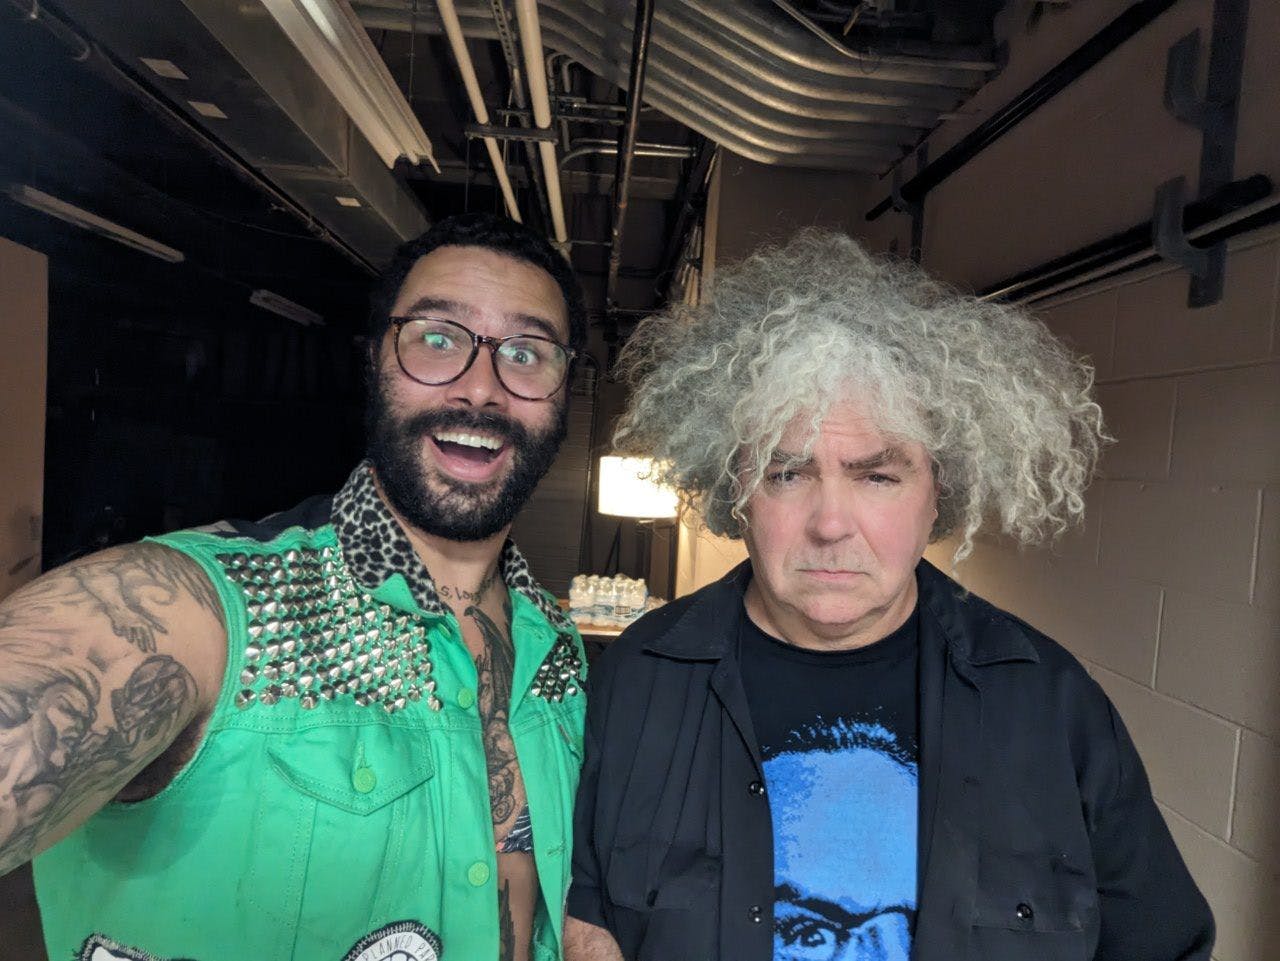 In the basement of the Howard Theater, nestled below the stage, I had the opportunity to sit down with Buzz Osborne of the Melvins.